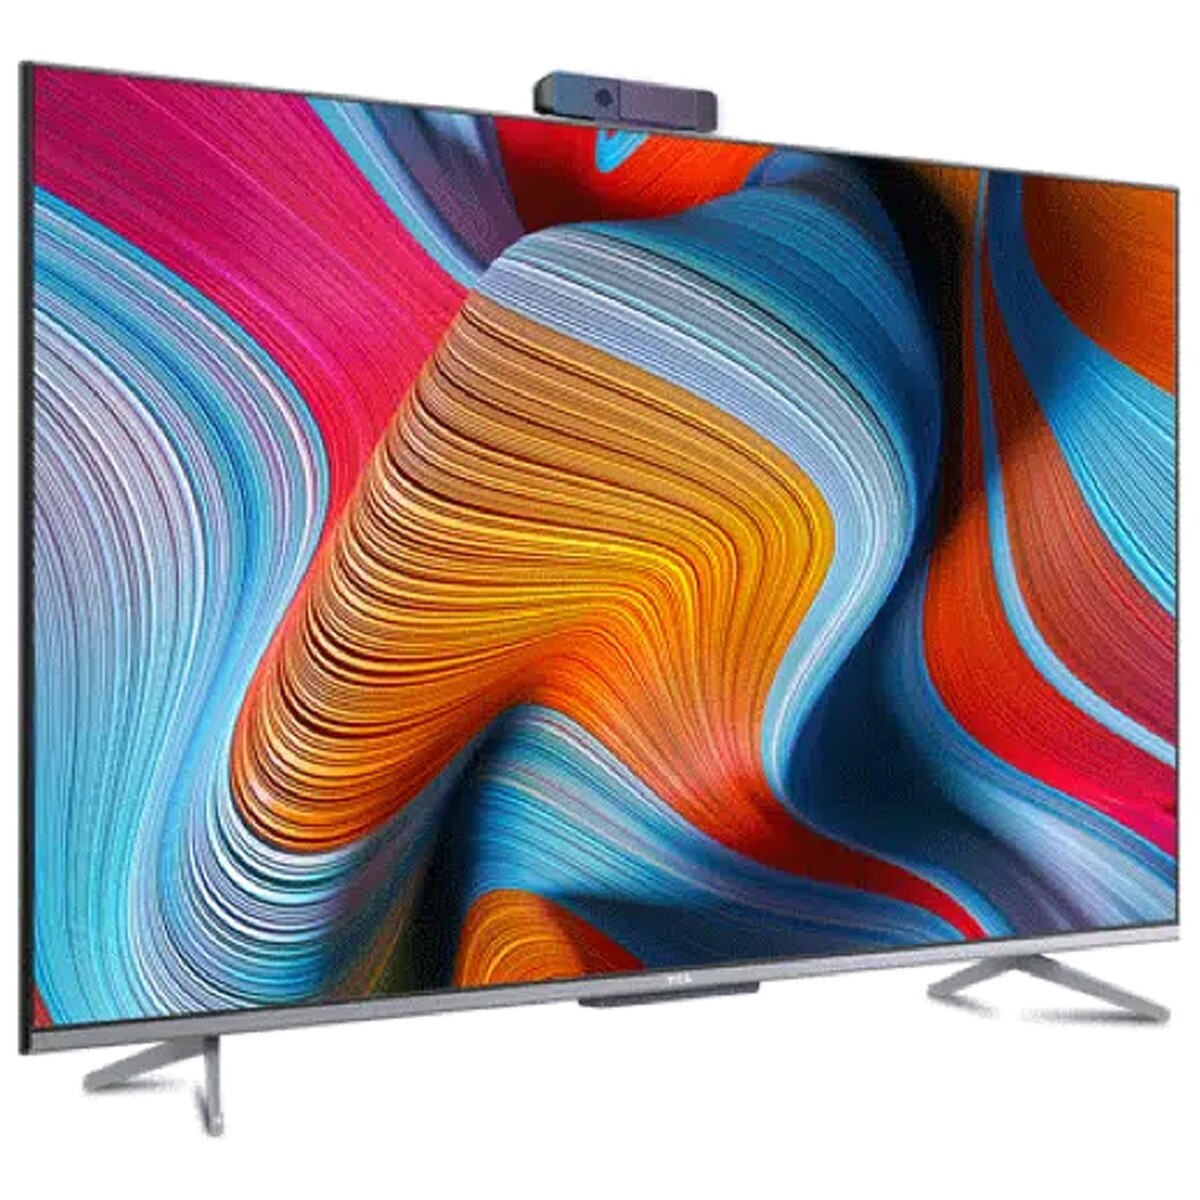 TCL Ultra HD 4K Android Smart LED TV 50P725 50"